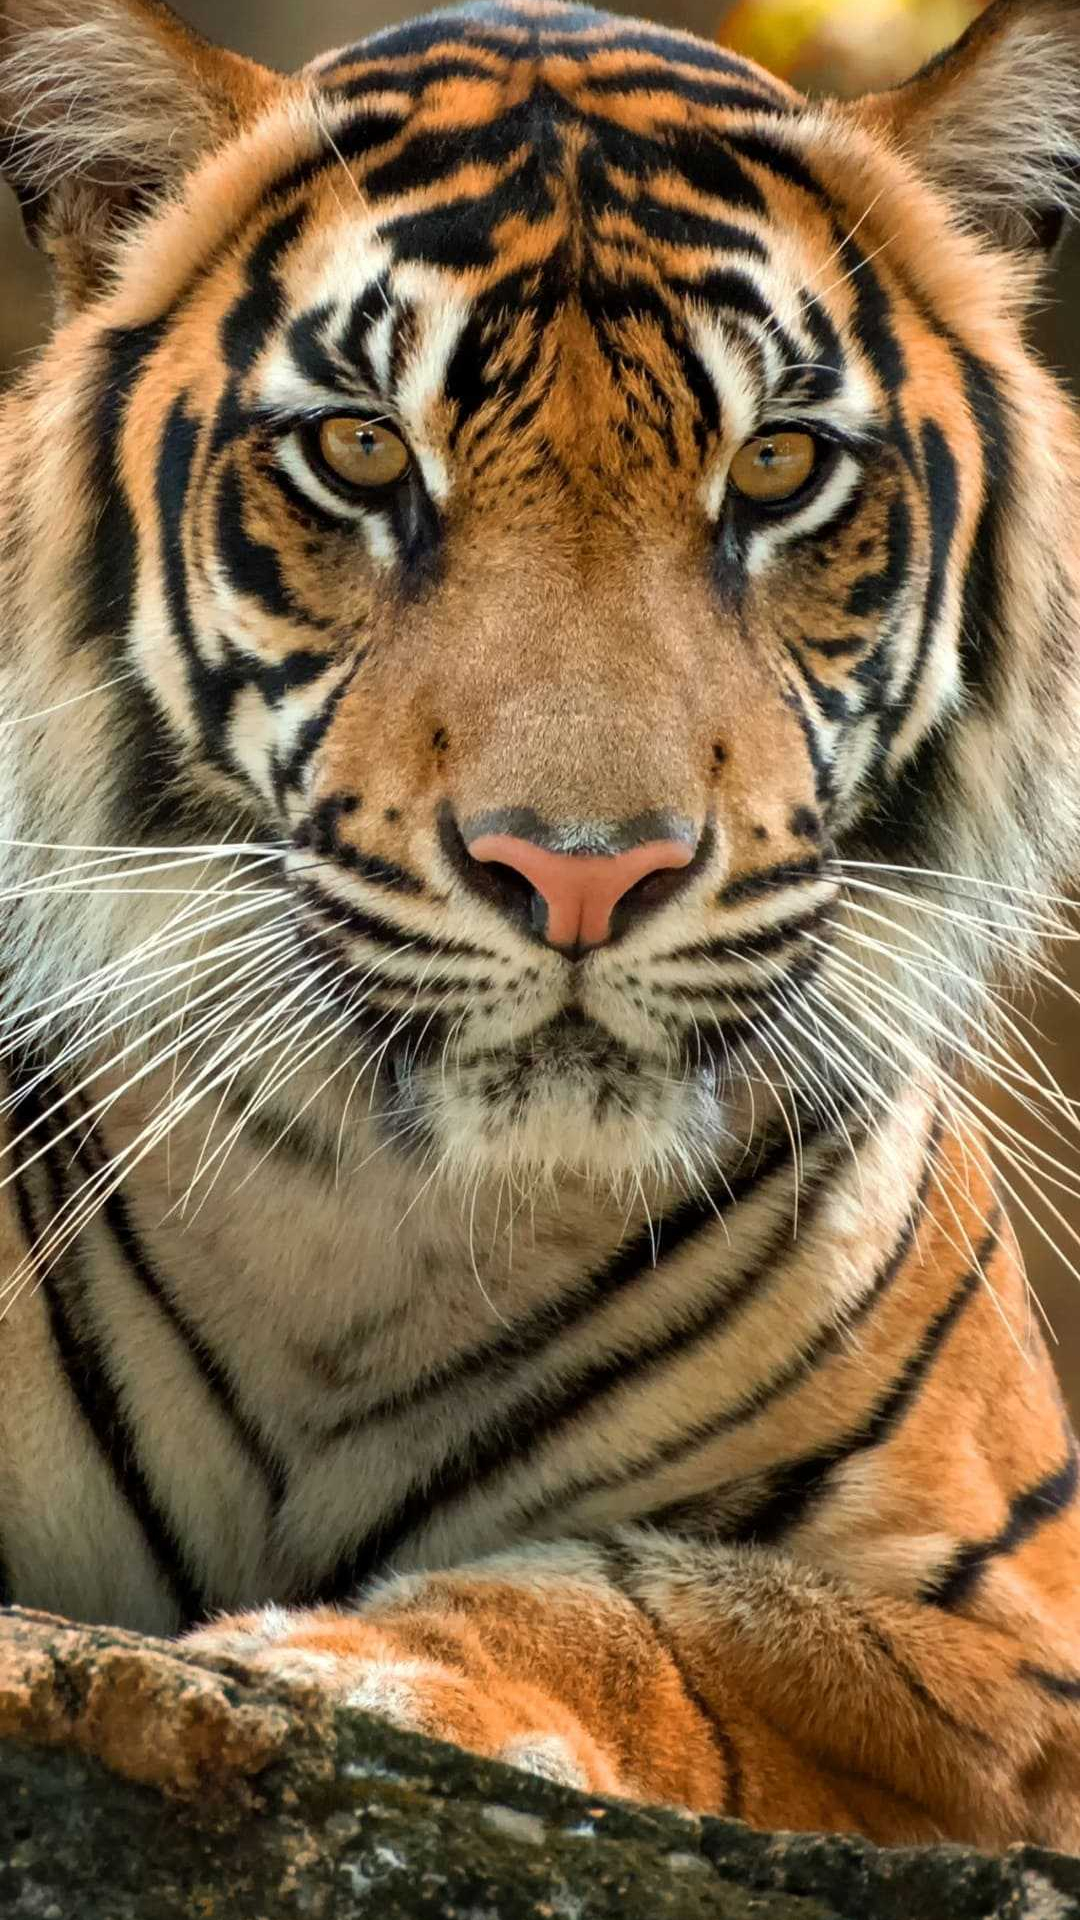 Tiger Phone Wallpapers